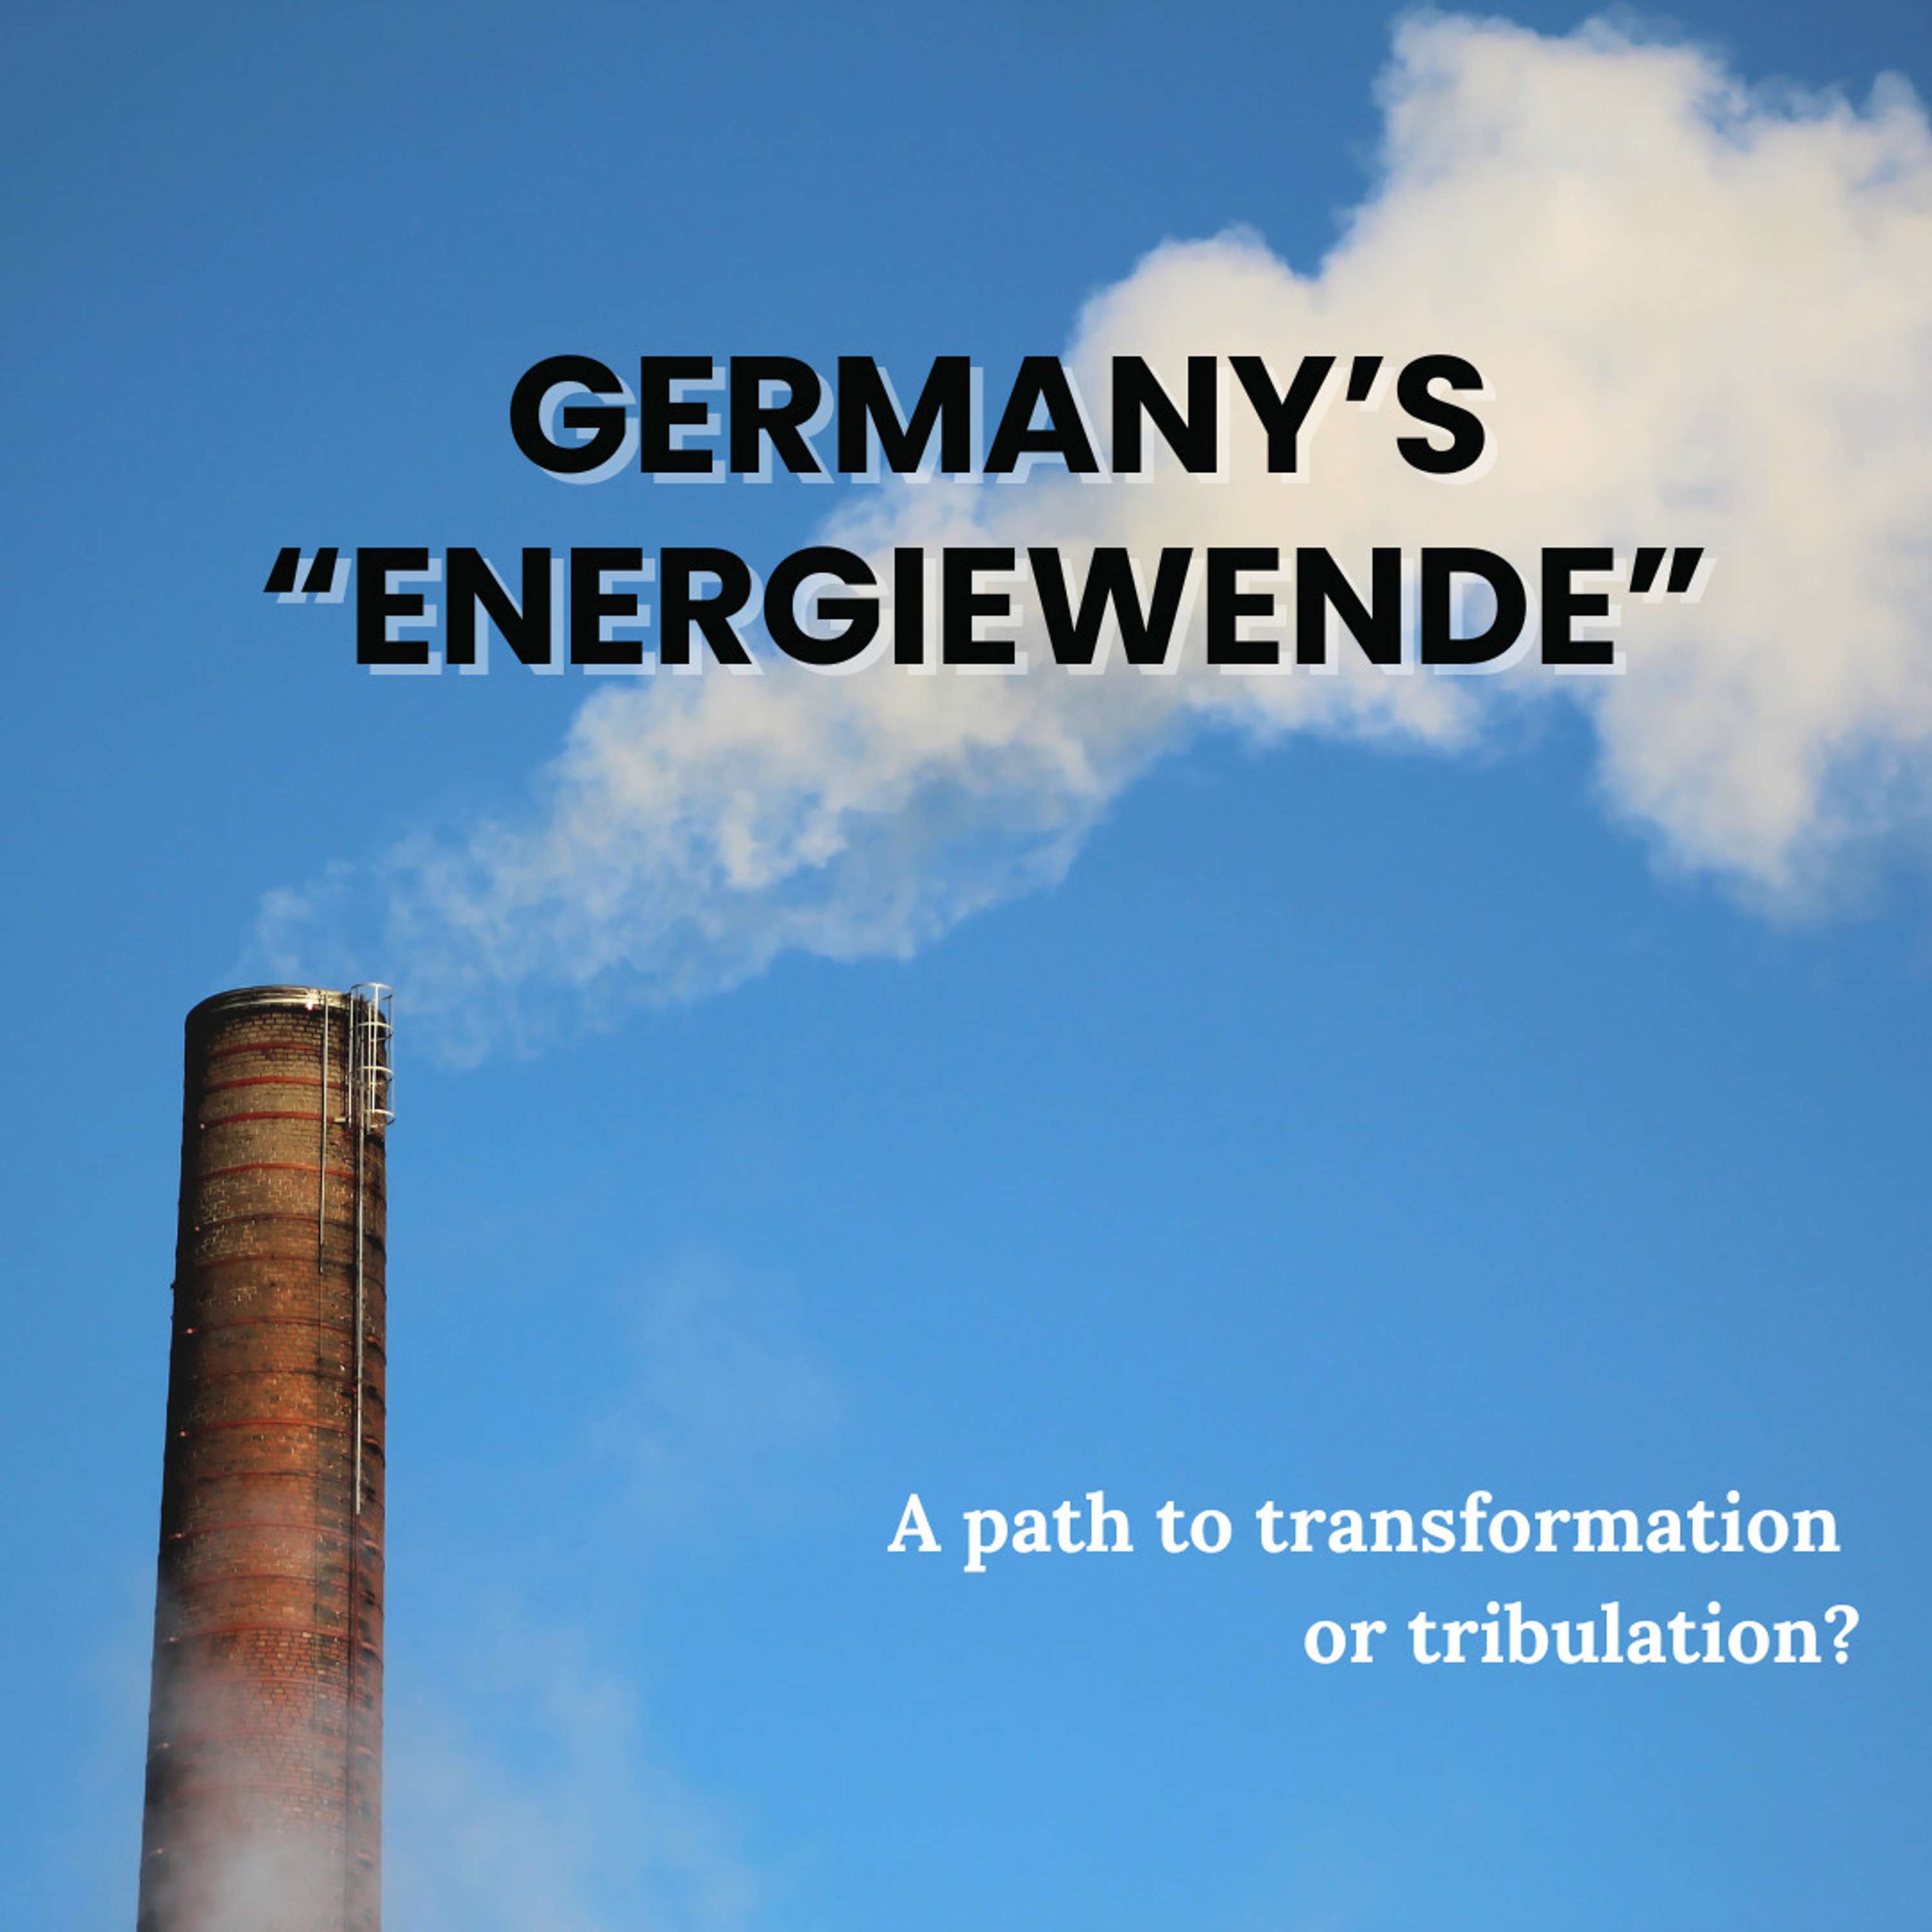 Germany’s “Energiewende” – A path to transformation or tribulation?